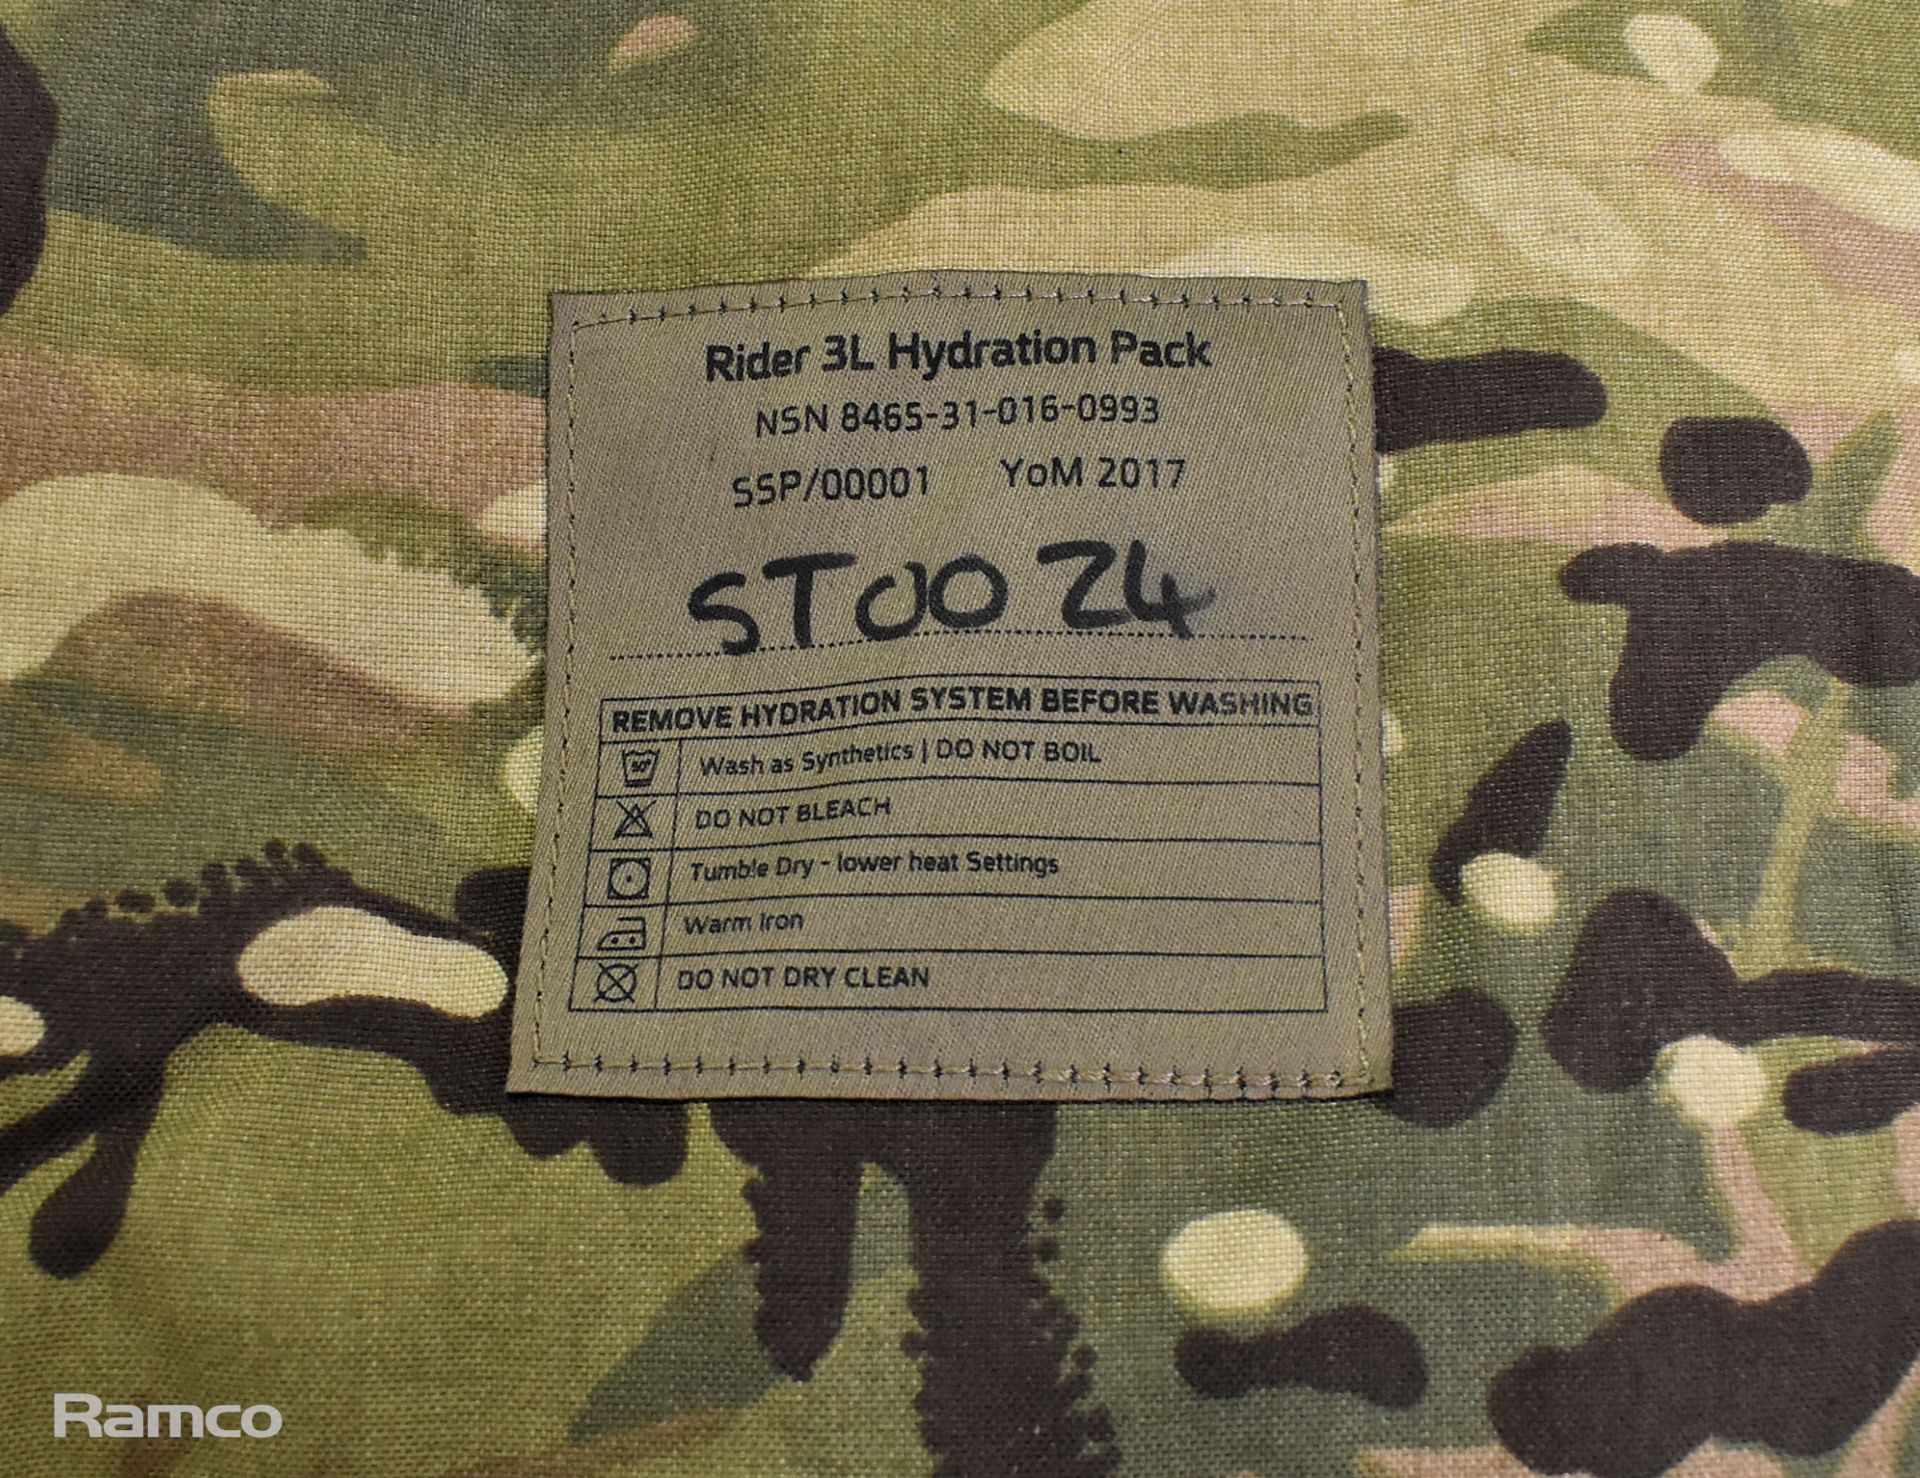 British Army cold weather caps, combat hats, 3L hydration packs - see description for details - Image 12 of 13